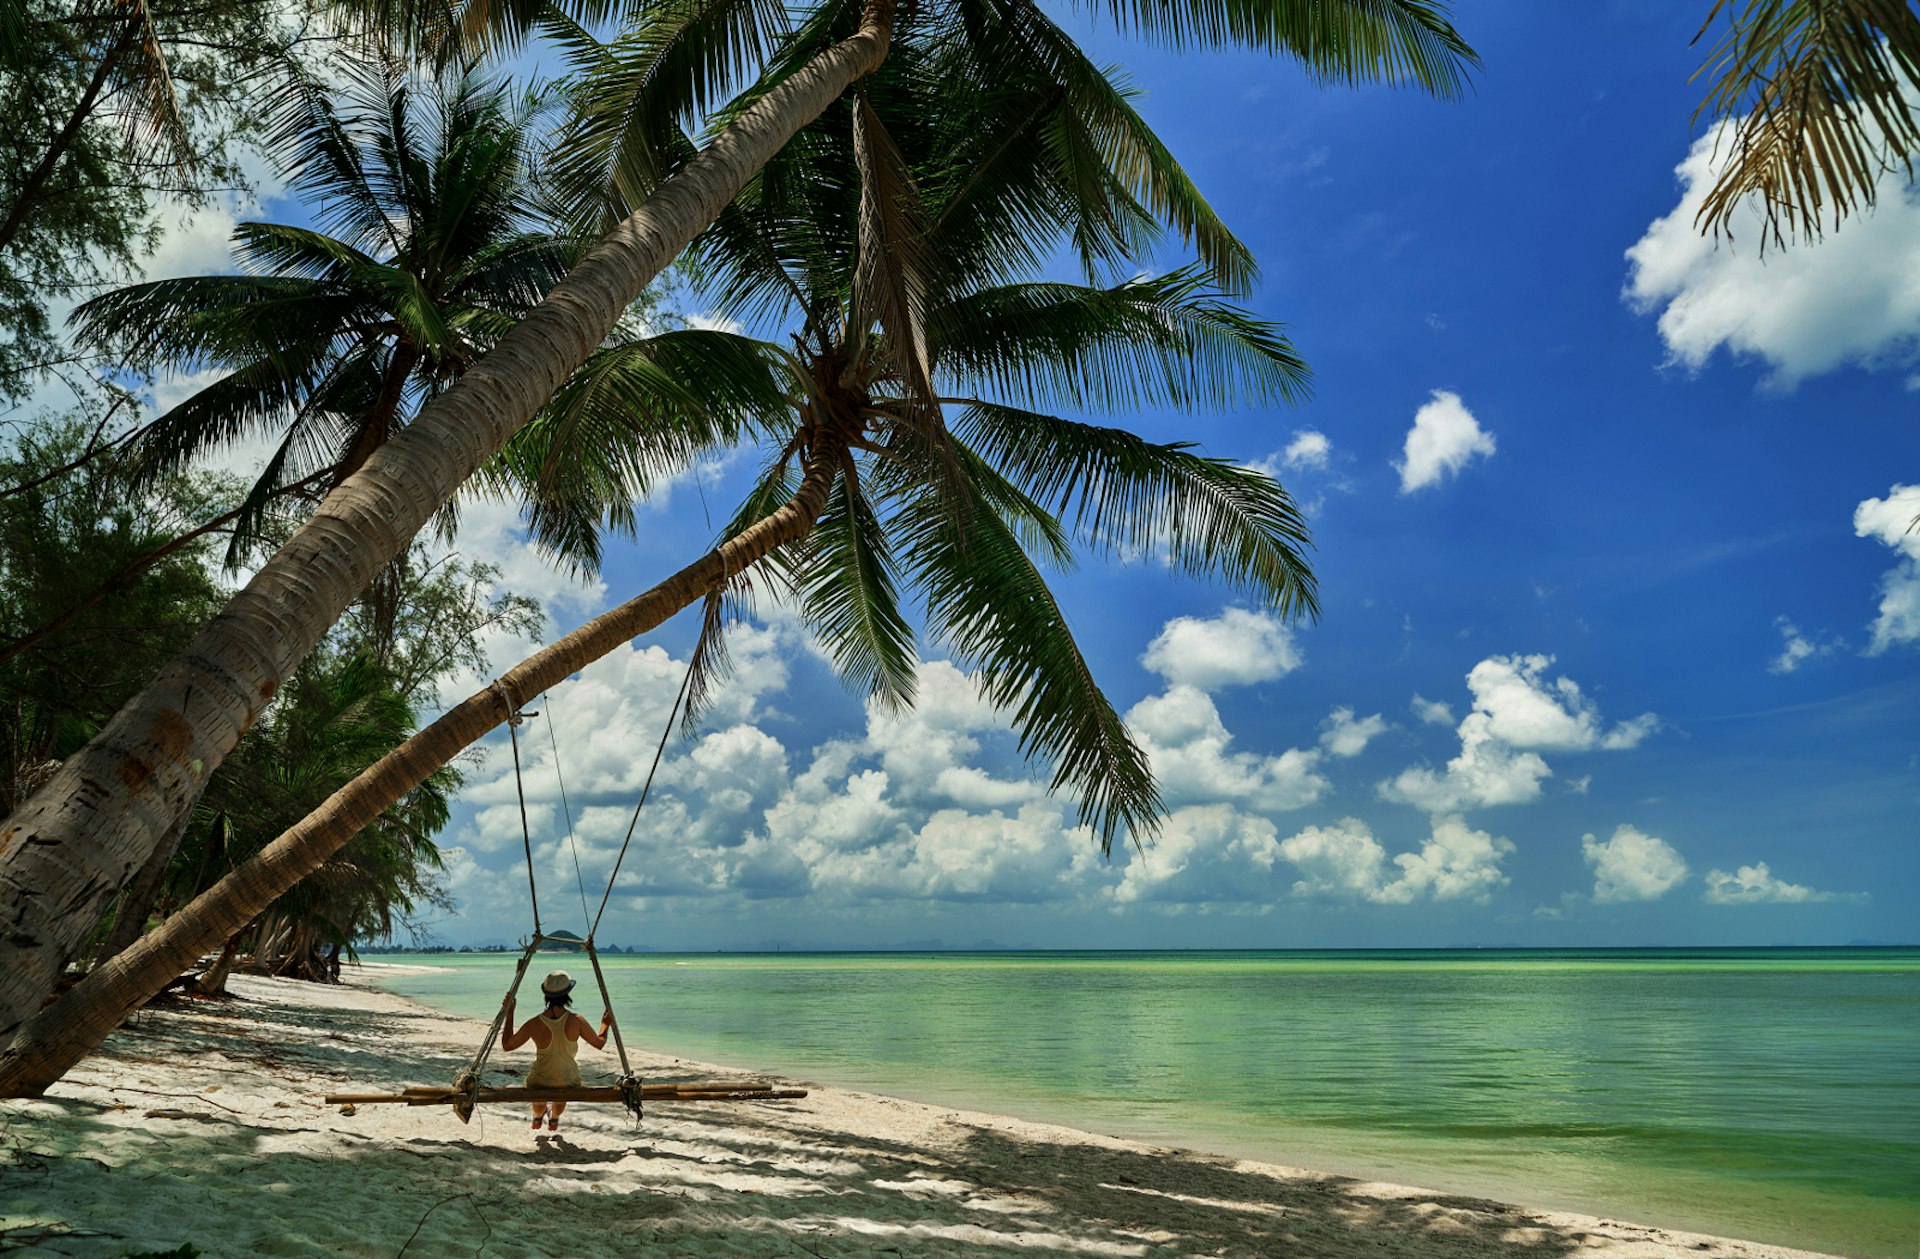 A woman in a sunhat, vest and shorts sits on a swing that hangs over the beach from a large leaning palm tree; to her right are tropical waters and above a vibrant blue sky dotted with puffy white clouds